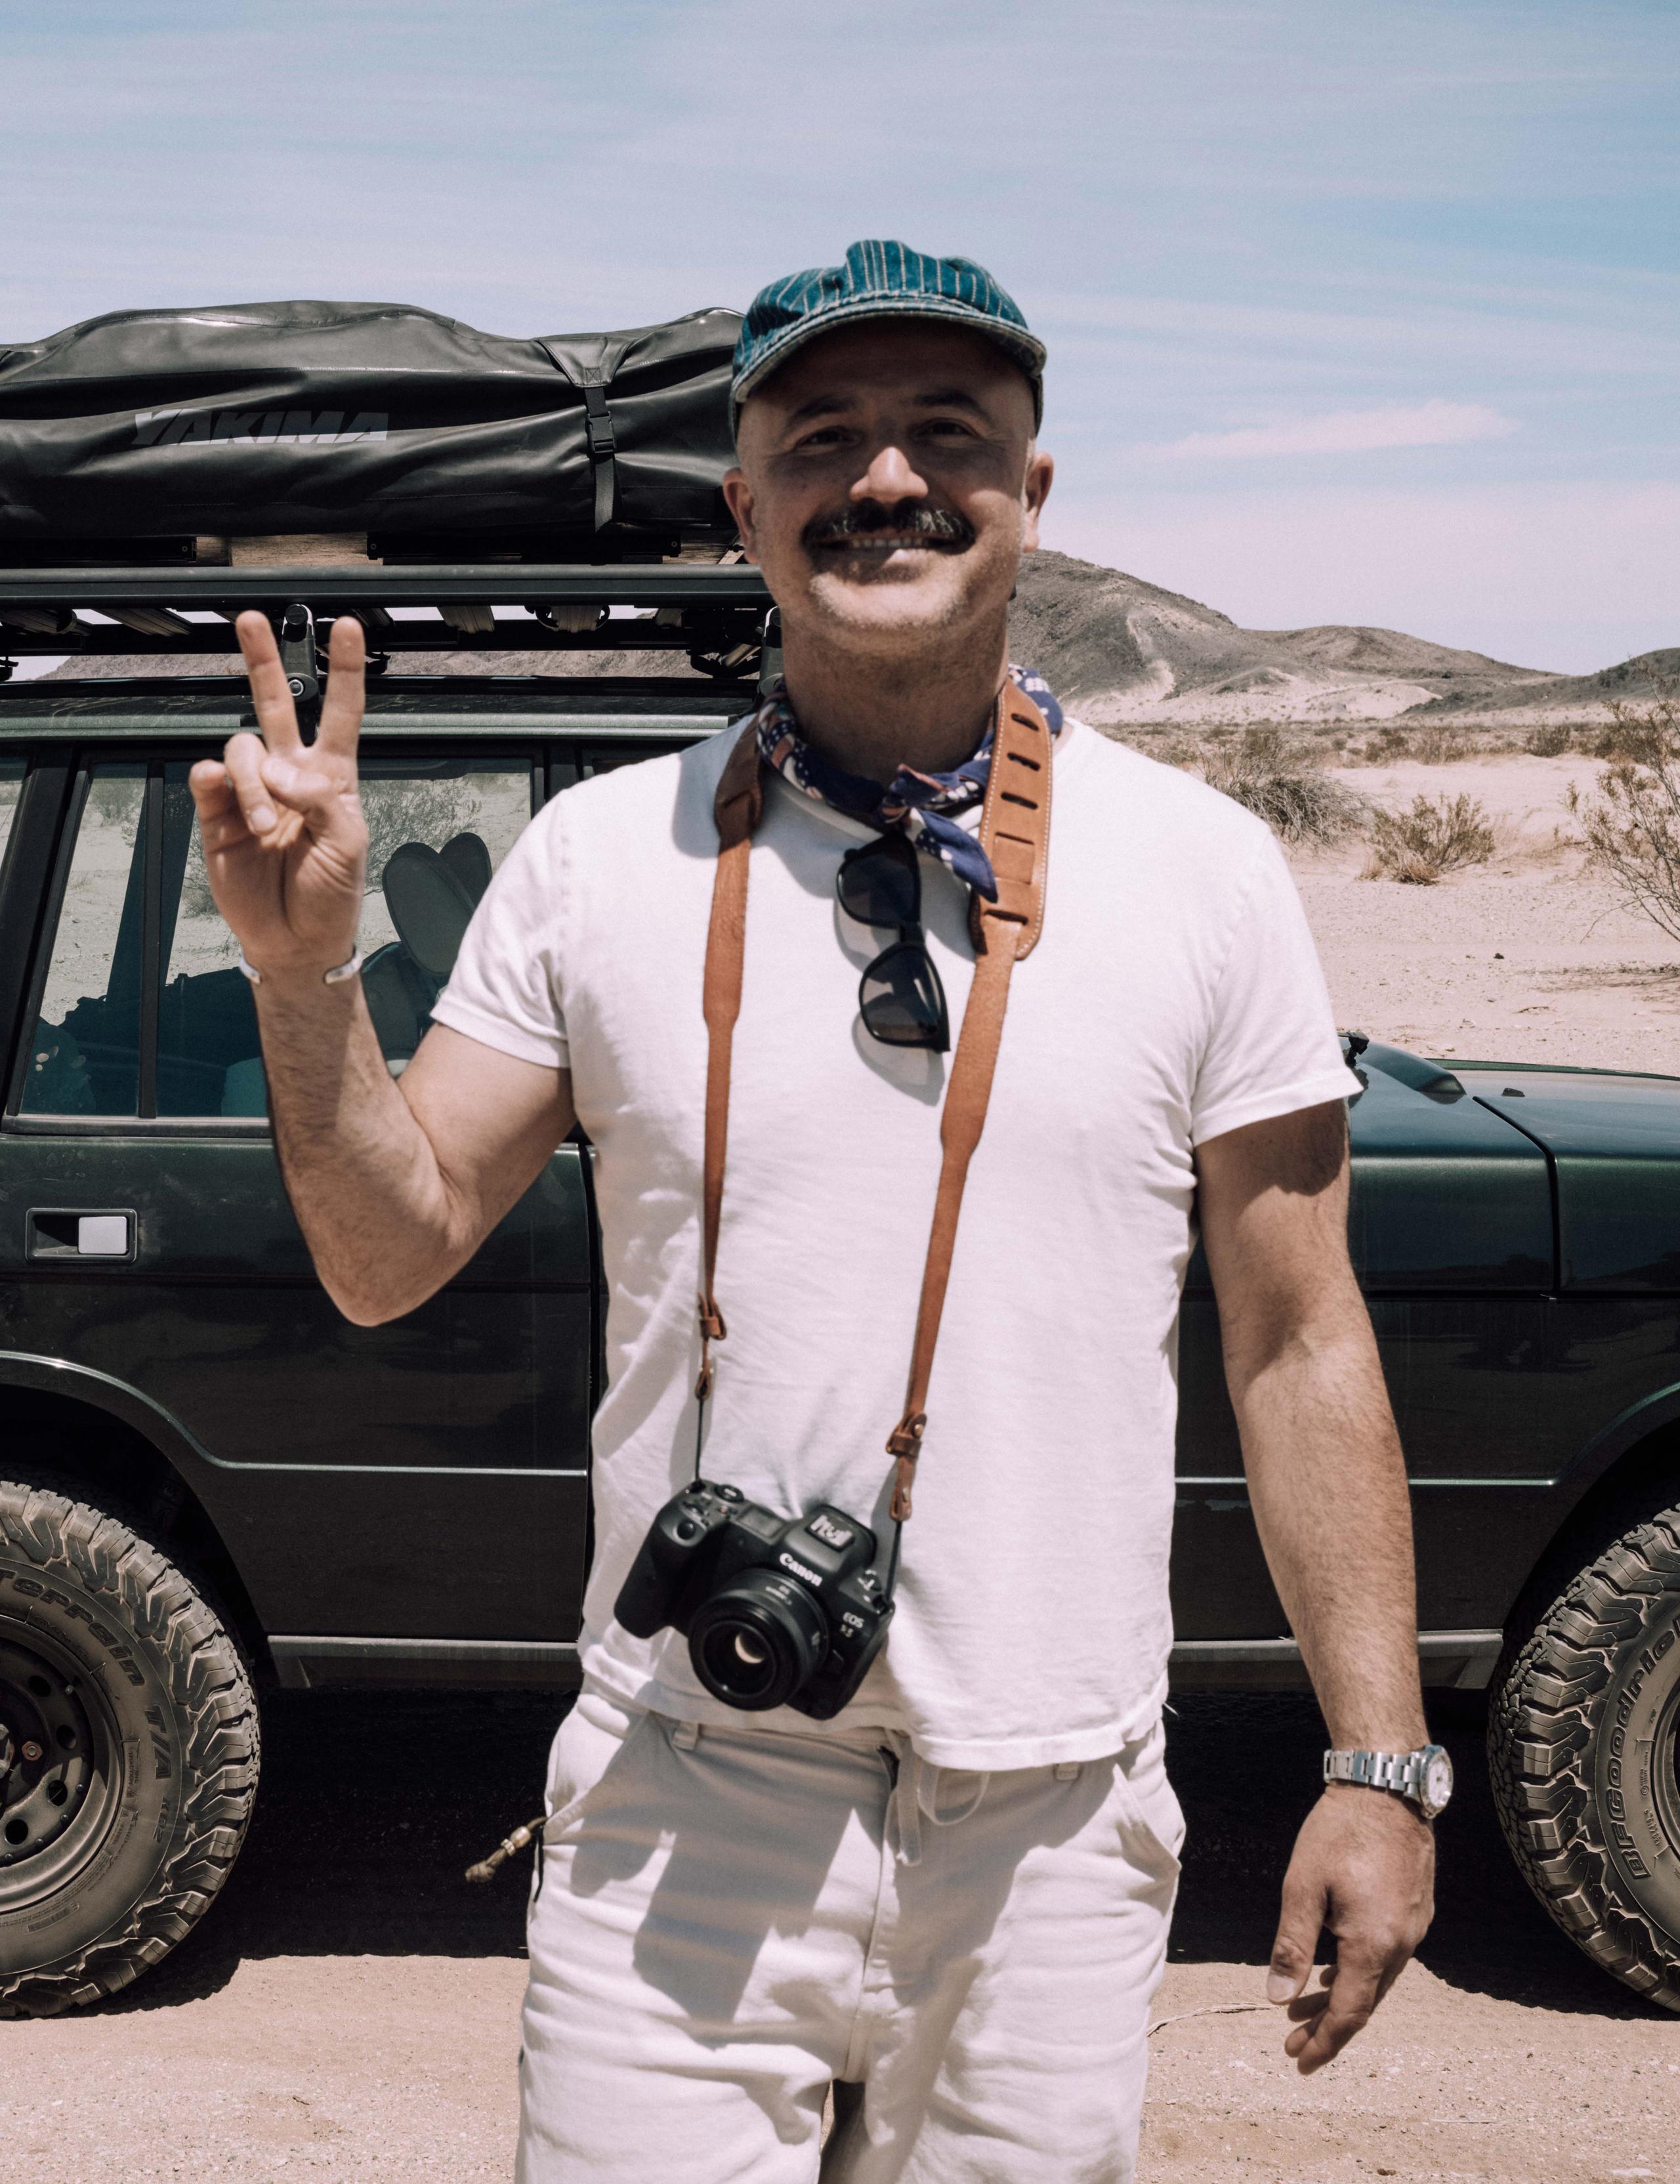 Man with camera around his neck giving the peace sign standing in front of Land Rover in Joshua Tree